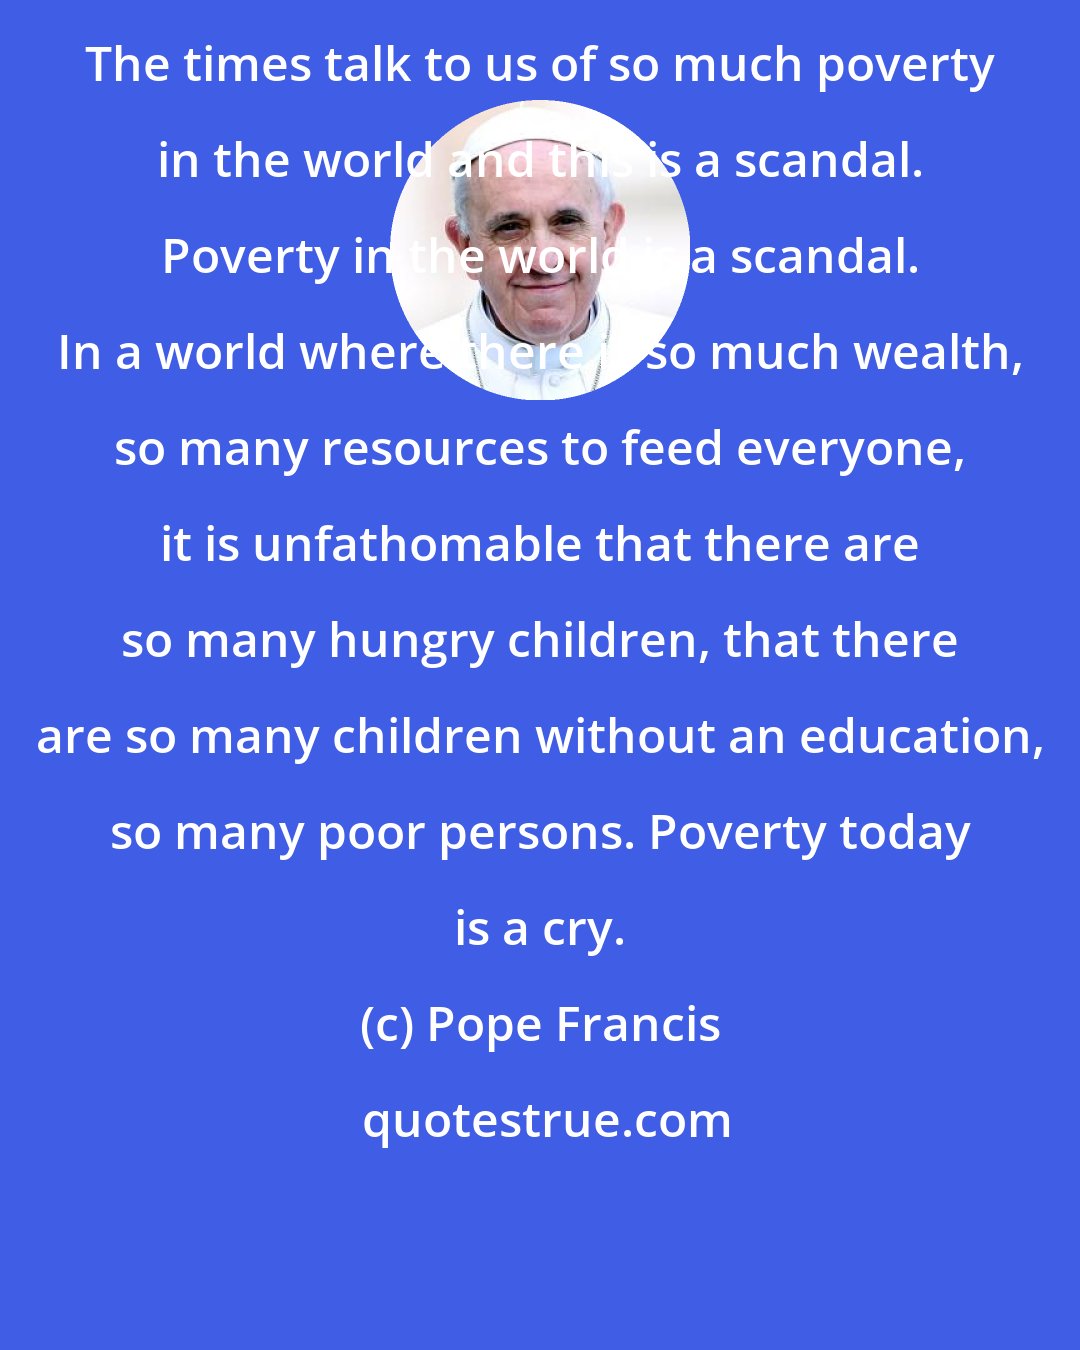 Pope Francis: The times talk to us of so much poverty in the world and this is a scandal. Poverty in the world is a scandal. In a world where there is so much wealth, so many resources to feed everyone, it is unfathomable that there are so many hungry children, that there are so many children without an education, so many poor persons. Poverty today is a cry.